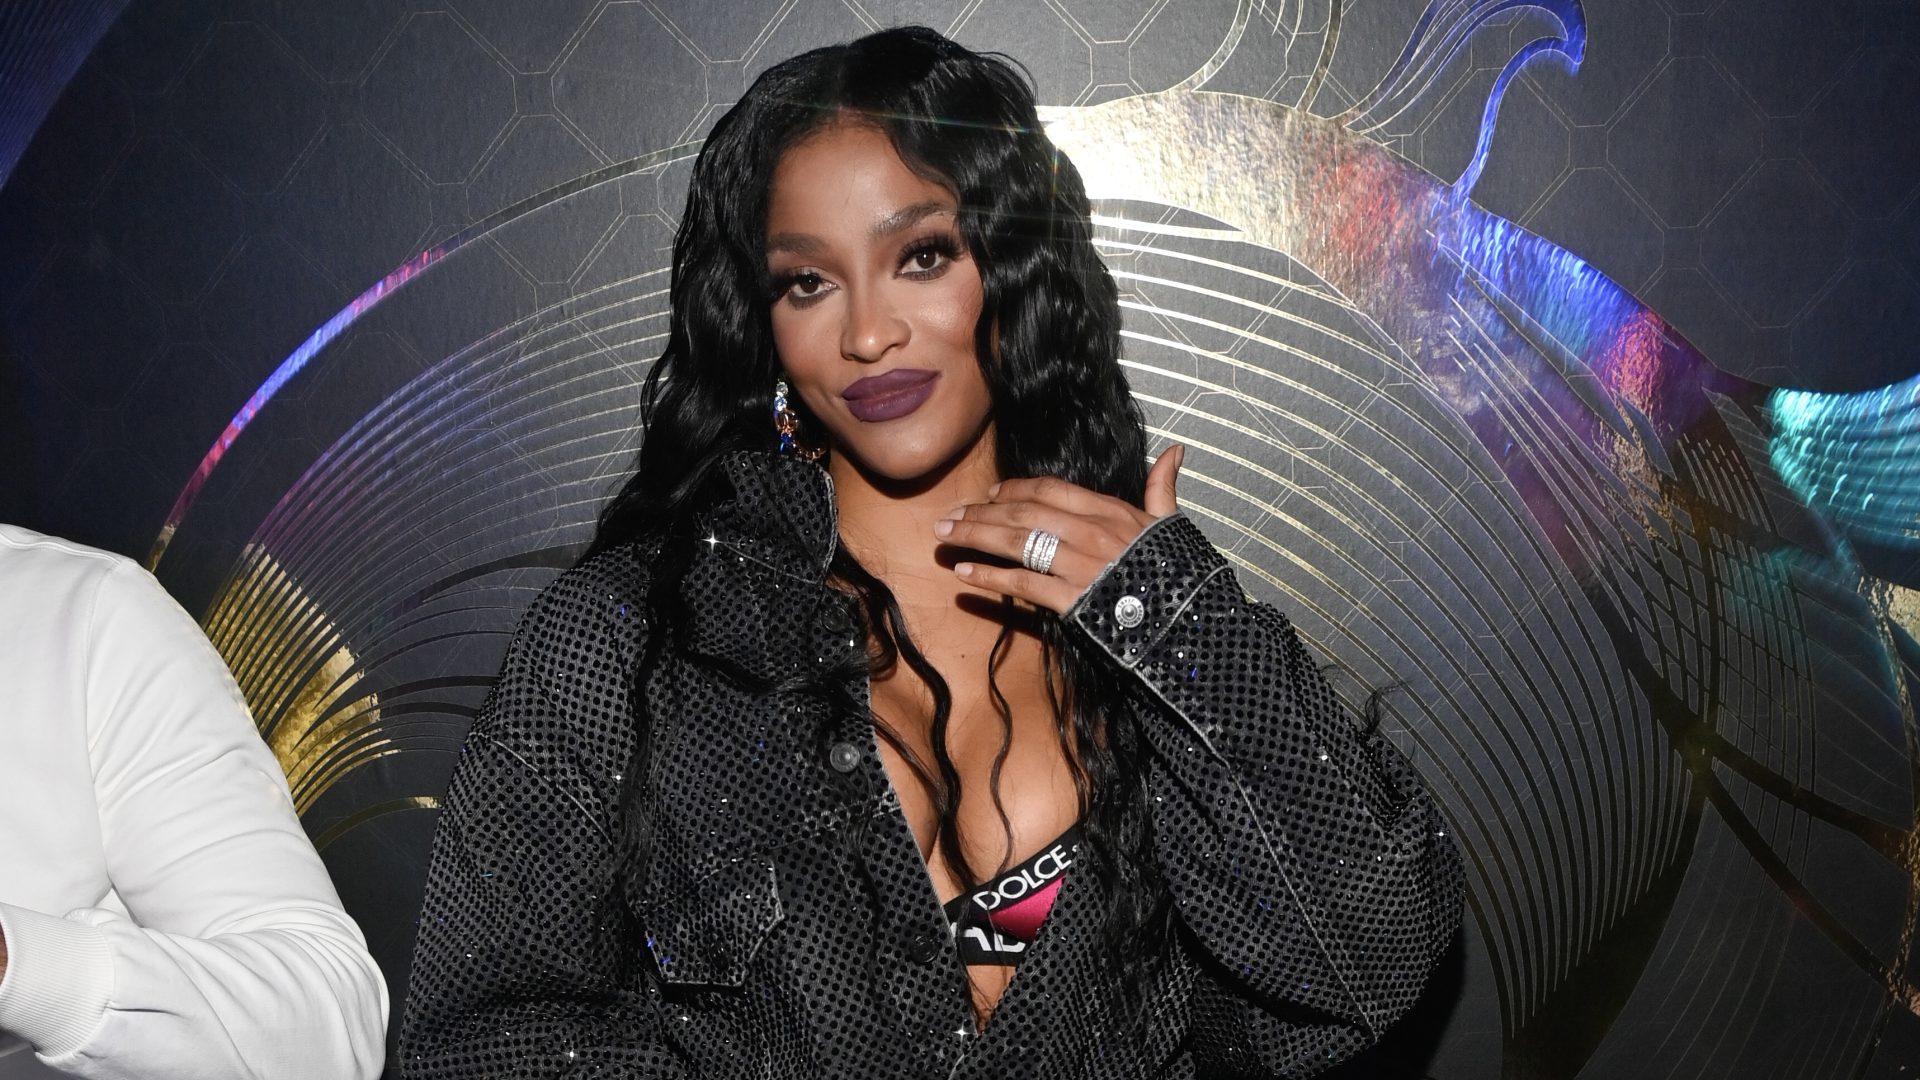 WATCH: Joseline Hernandez Gets Emotional After Performing Sober For The First Time